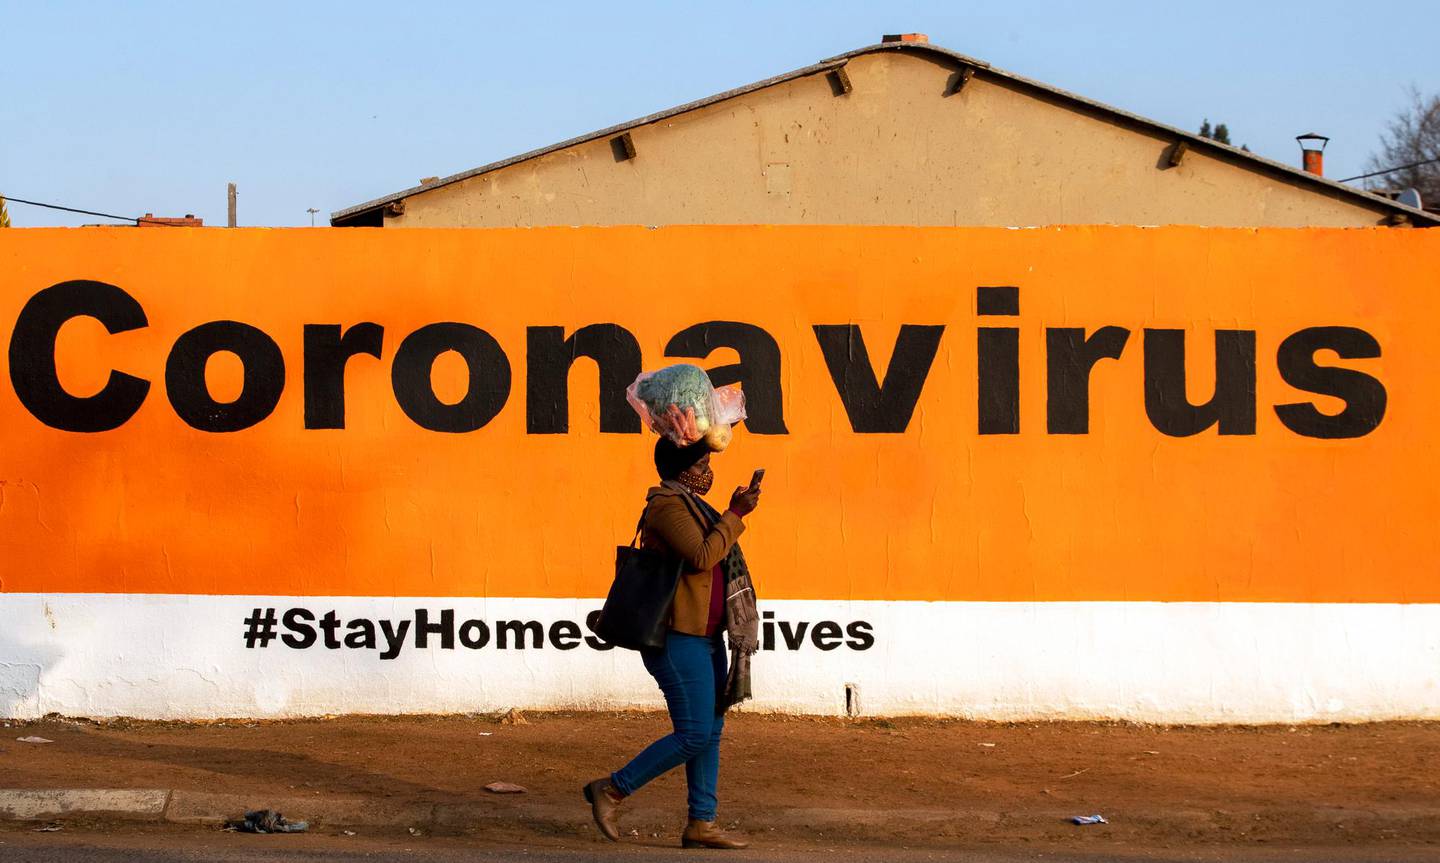 FILE - In this June 19, 2020, file photo, a woman wearing a face mask passes a coronavirus billboard carrying a message in a bid to prevent the spread of the virus. South Africas reported coronavirus are surging. Its hospitals are now bracing for an onslaught of patients, setting up temporary wards and hoping advances in treatment will help the countrys health facilities from becoming overwhelmed. (AP Photo/Themba Hadebe, File)